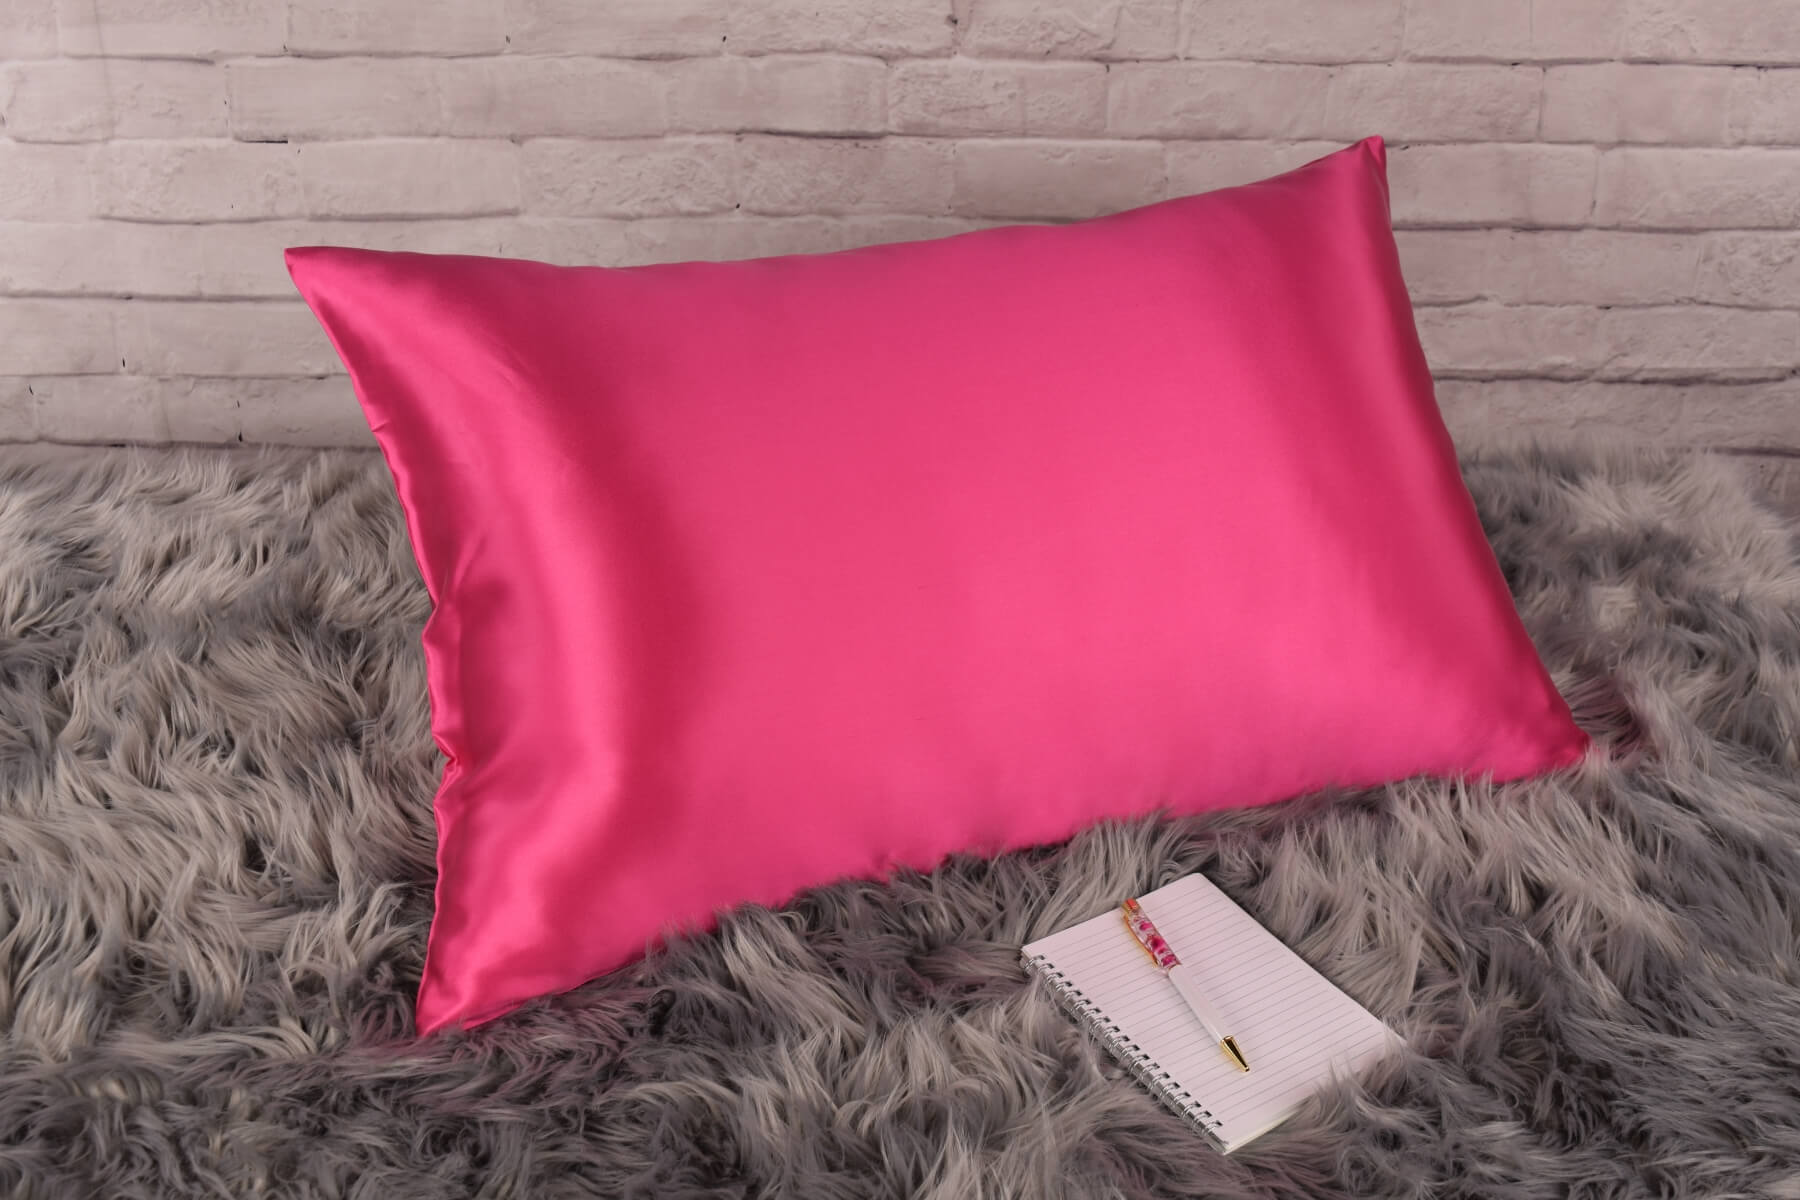 Celestial Silk Hot pink 25 momme Silk Pillowcase on rug with notebook and pretty pen